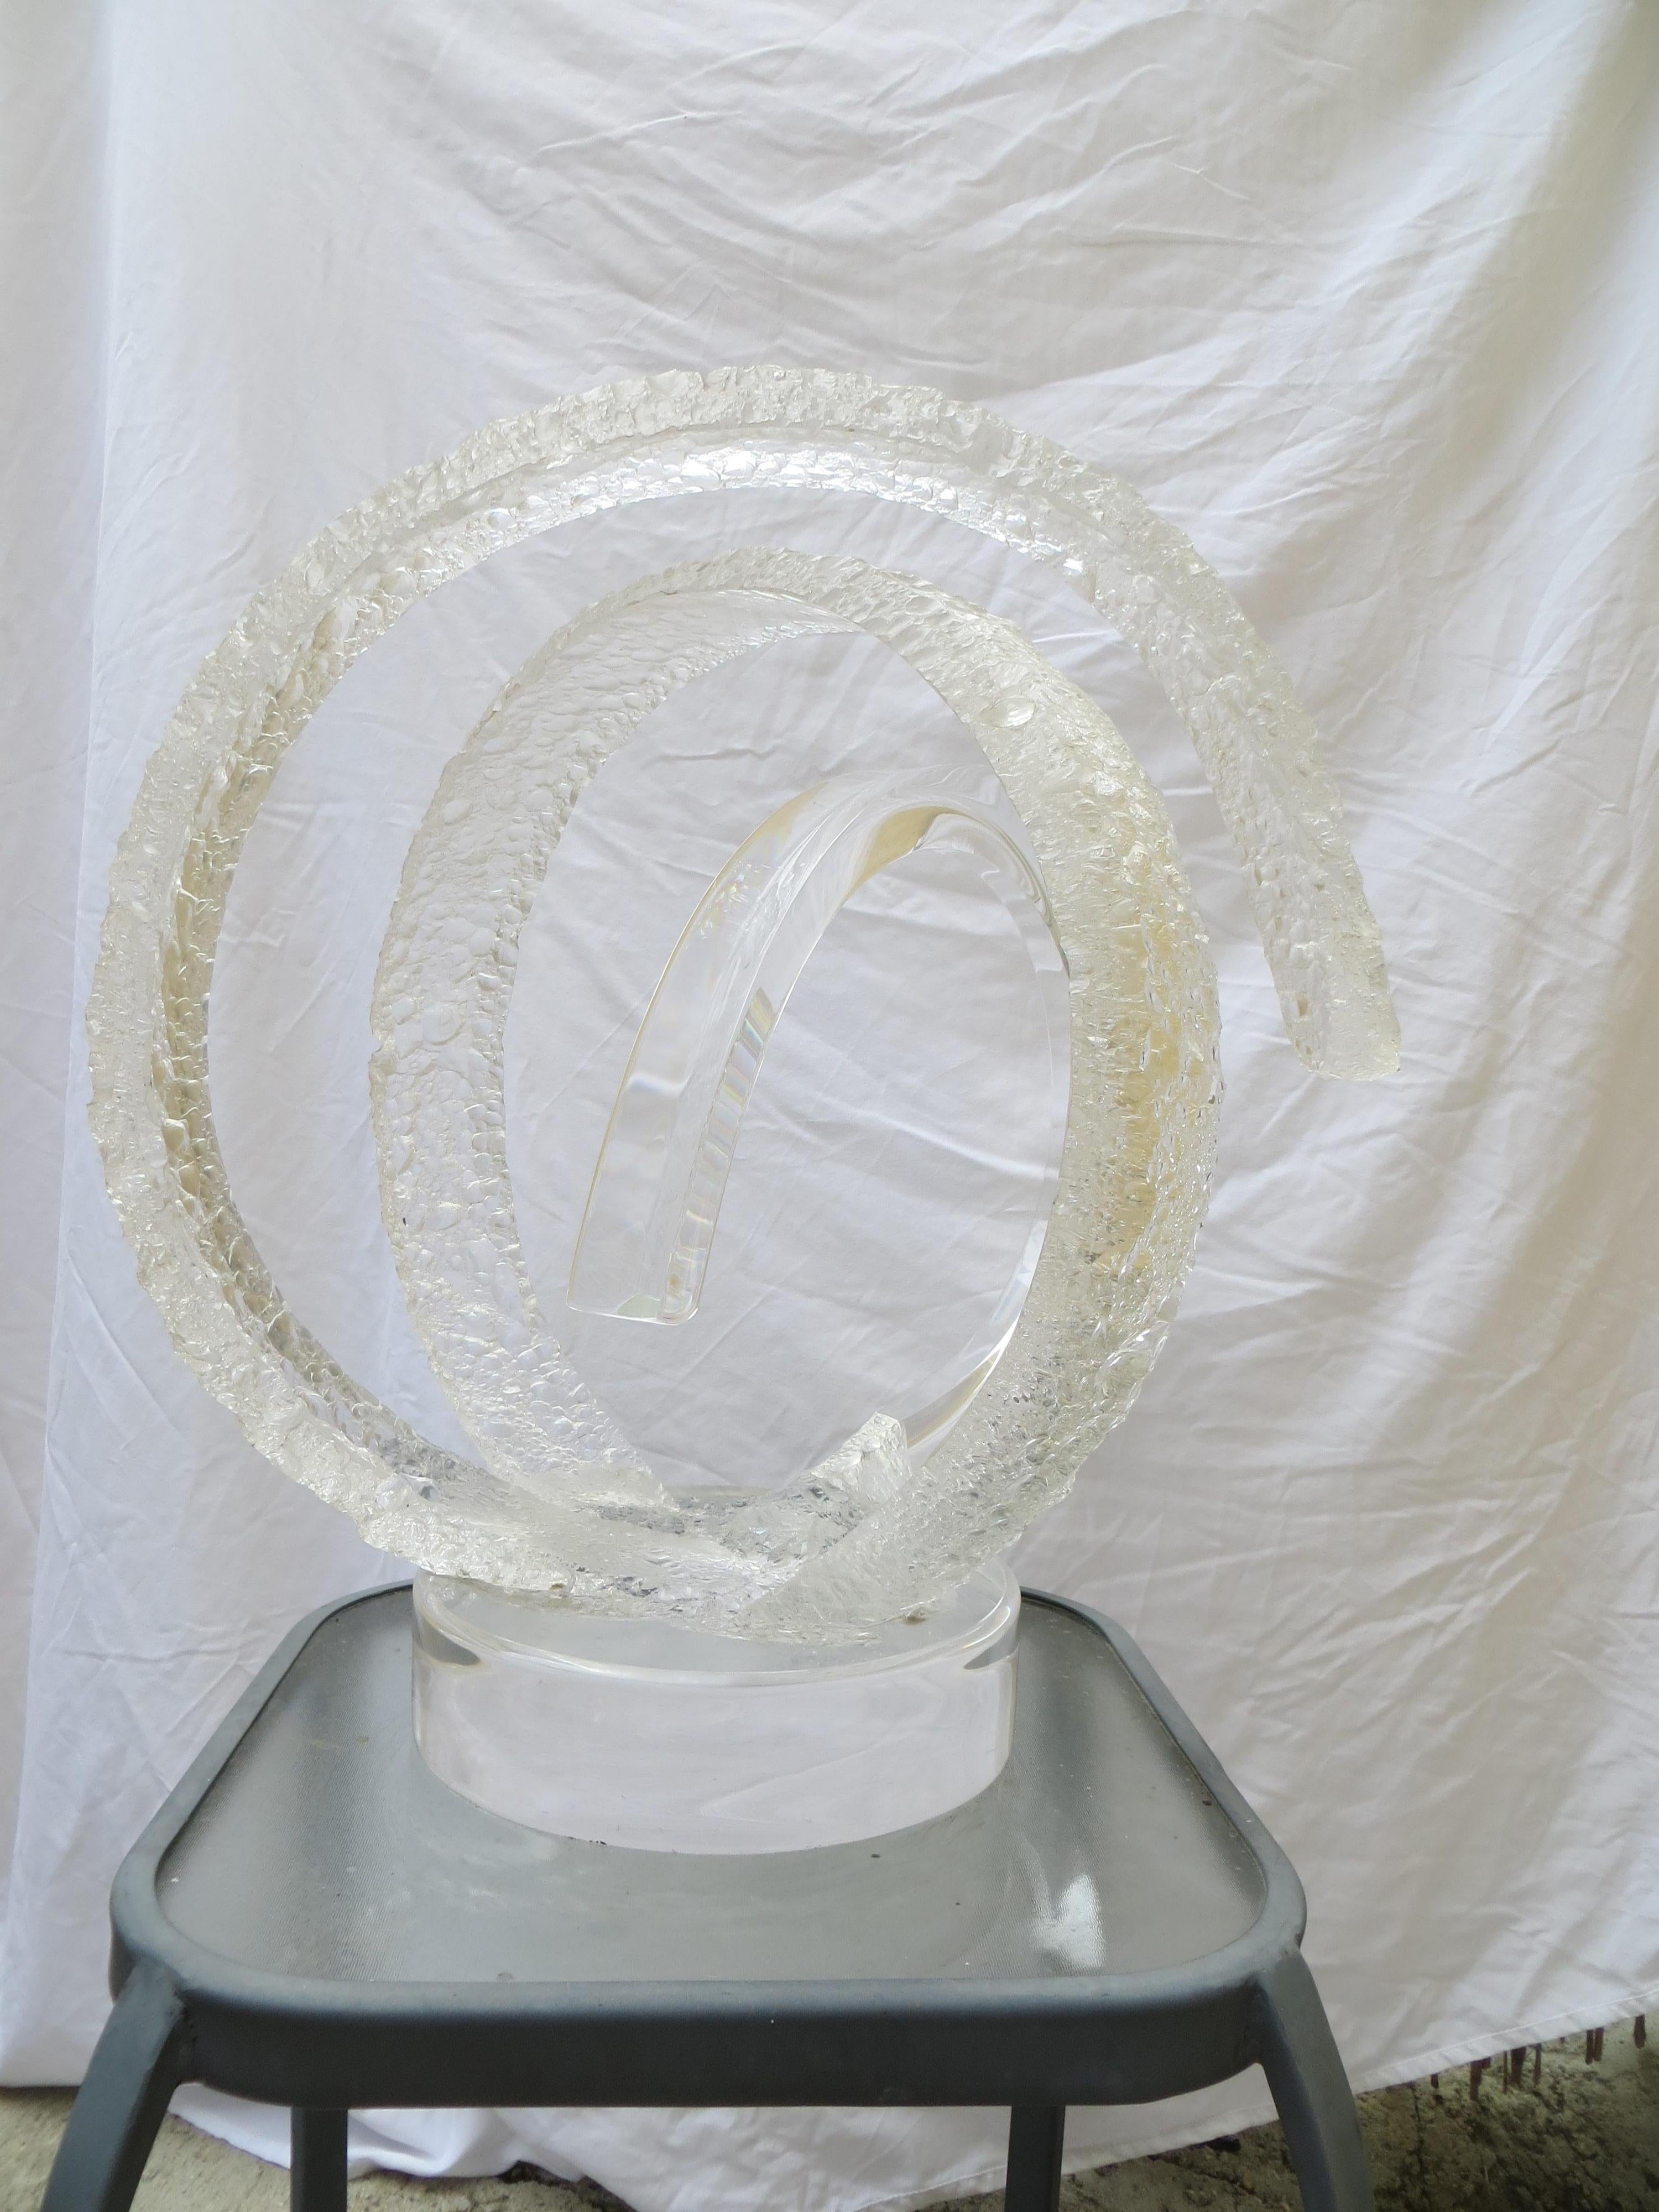 Signed Van Teal Lucite monumental sculpture large circular frosted and clear design. Perfect for the Hollywood Regency or Mid Century Modern décor
After fleeing Havana as a young man, Hivo Van Teal was able to unleash his artistic sensibilities and